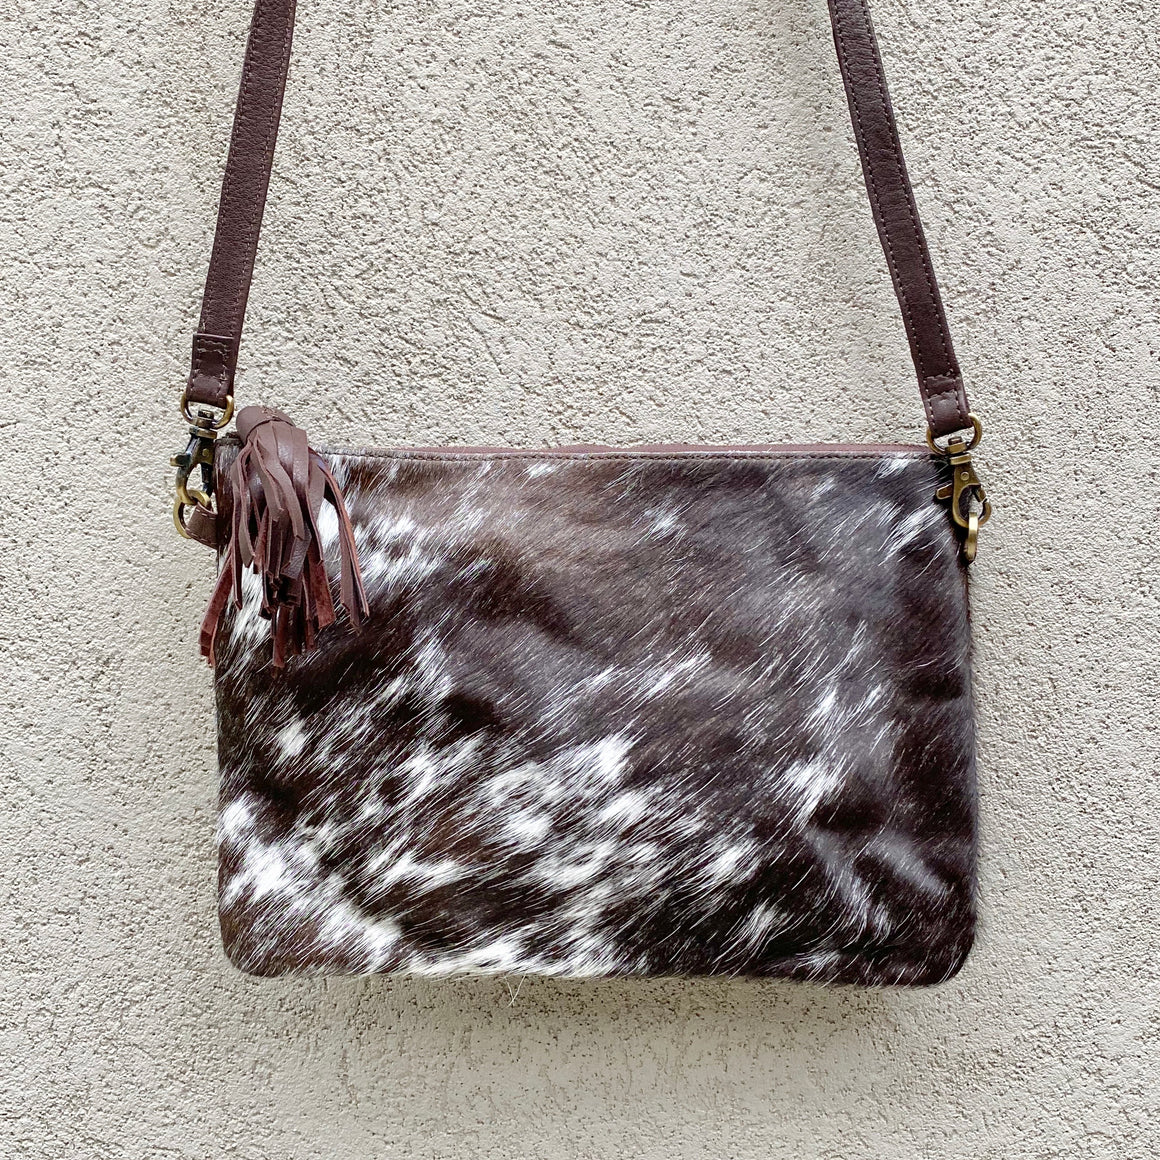 Sahara Reversible Cowhide & Leather Crossbody Clutch Bag - Speckled Chocolate White - KITTY KAT